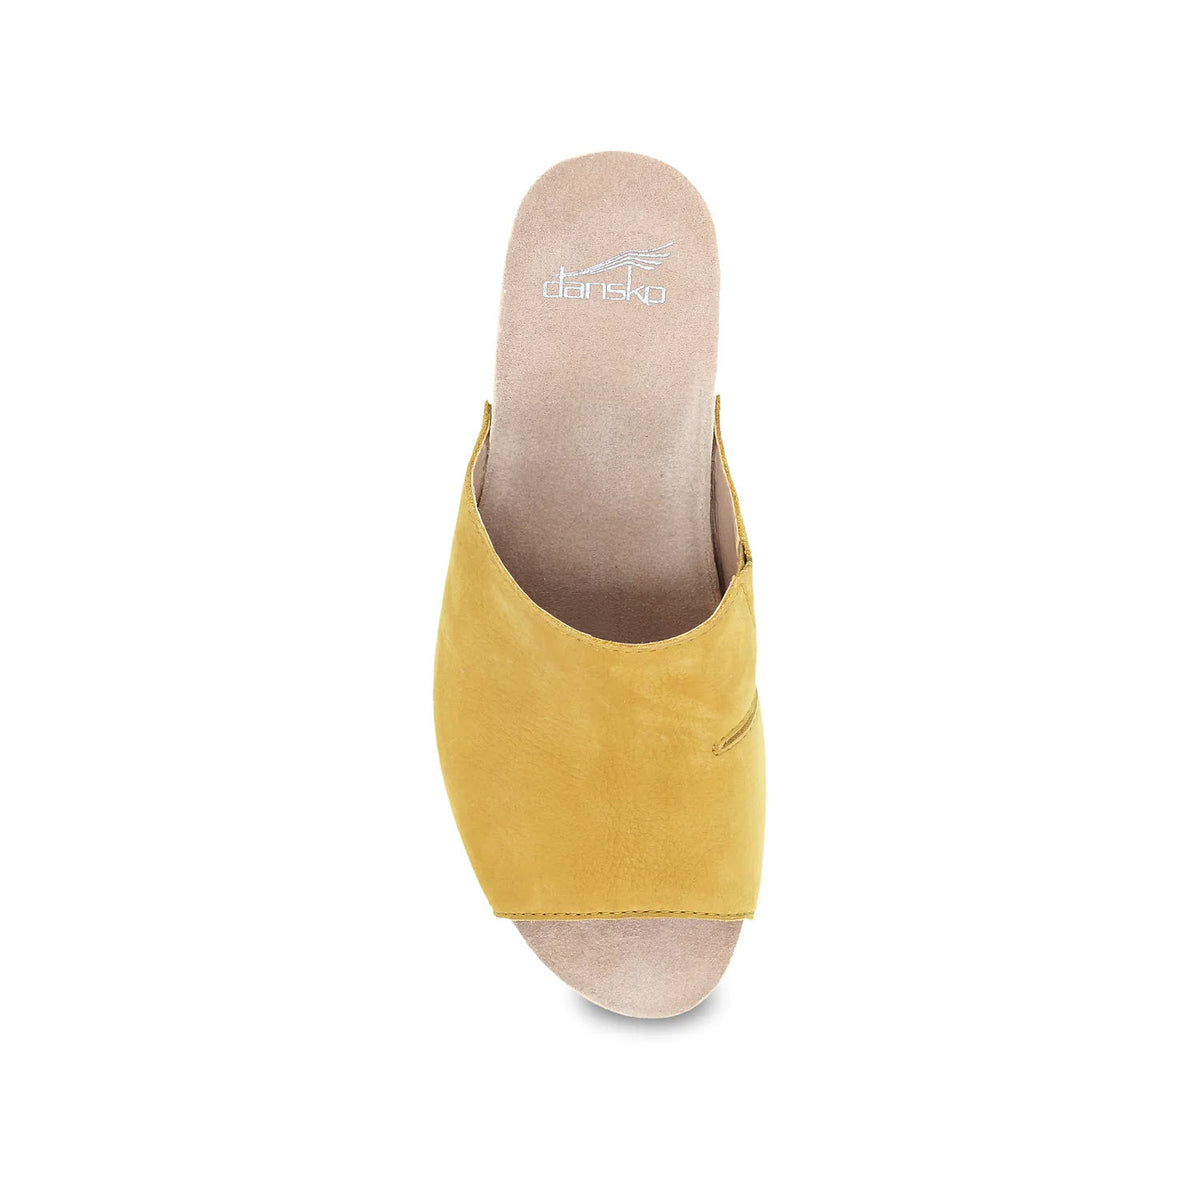 Top view of a single Dansko Tandi yellow sandal with an open toe and a small heel.